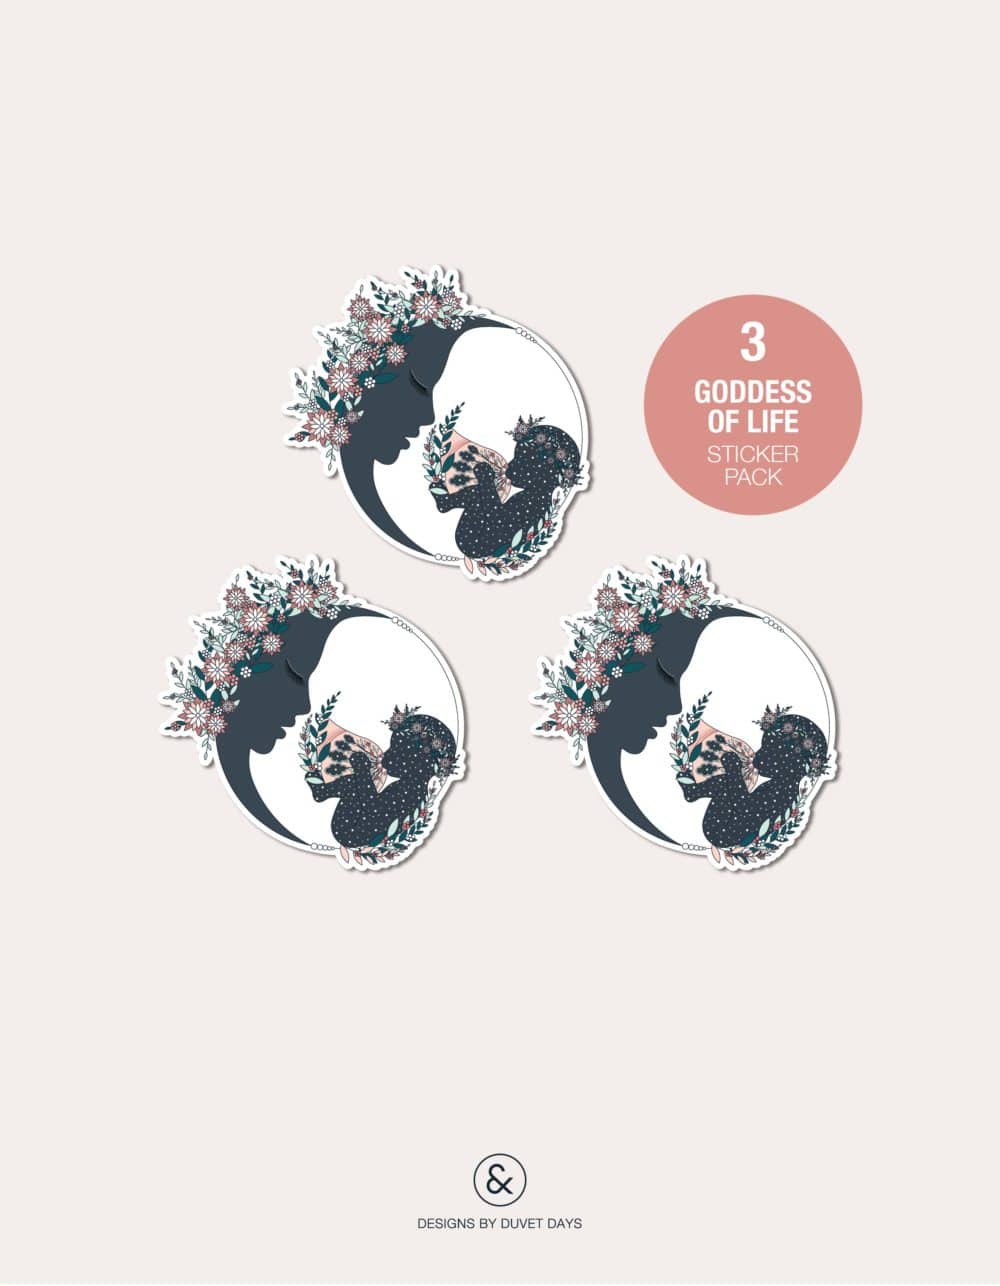 Designs By Duvet Days_Stickers_Goddess of Life_3pack